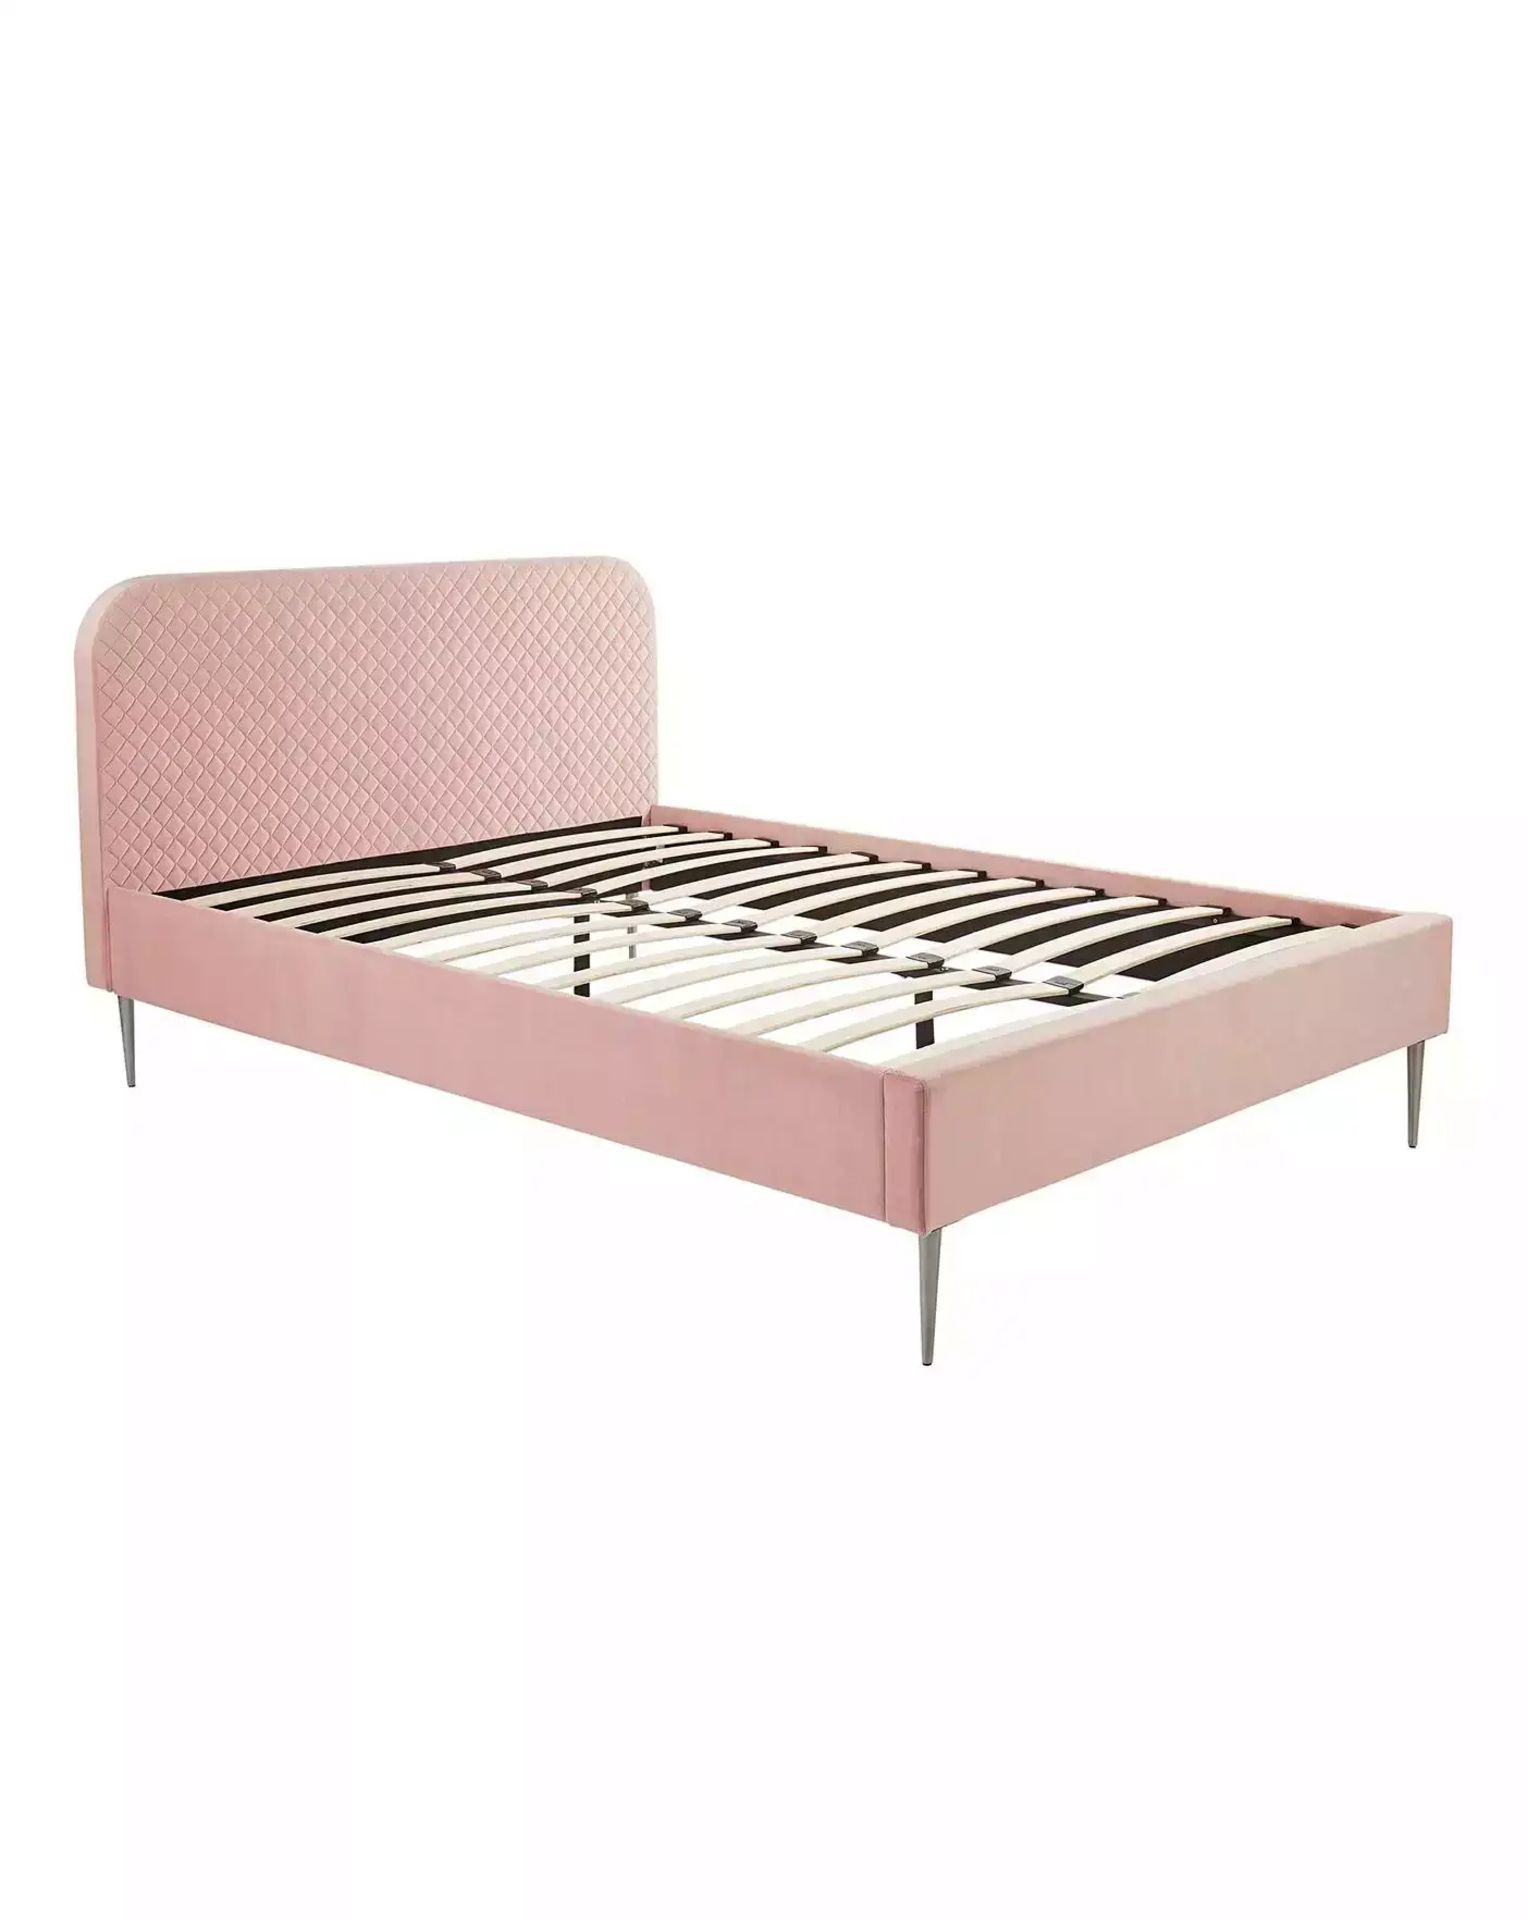 BRAND NEW ARDEN Quilted DOUBLE Bed Frame. BLUSH. RRP £339 EACH. The Arden Quilted Bed is the perfect - Image 3 of 3